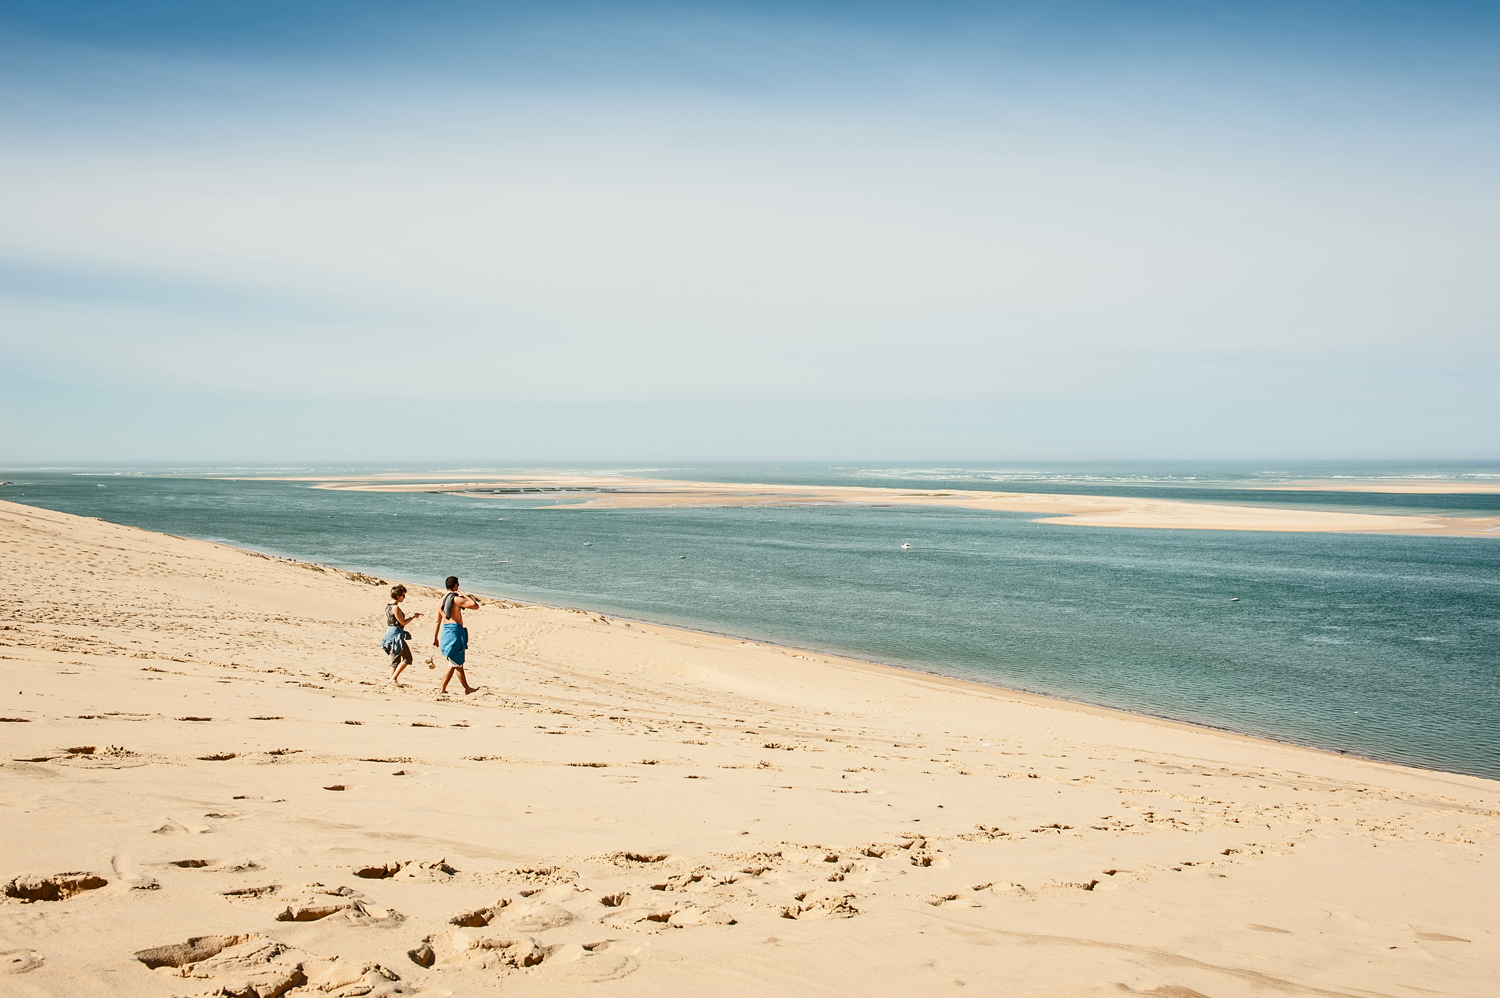 All the seaside beach by the ocean in Gironde!